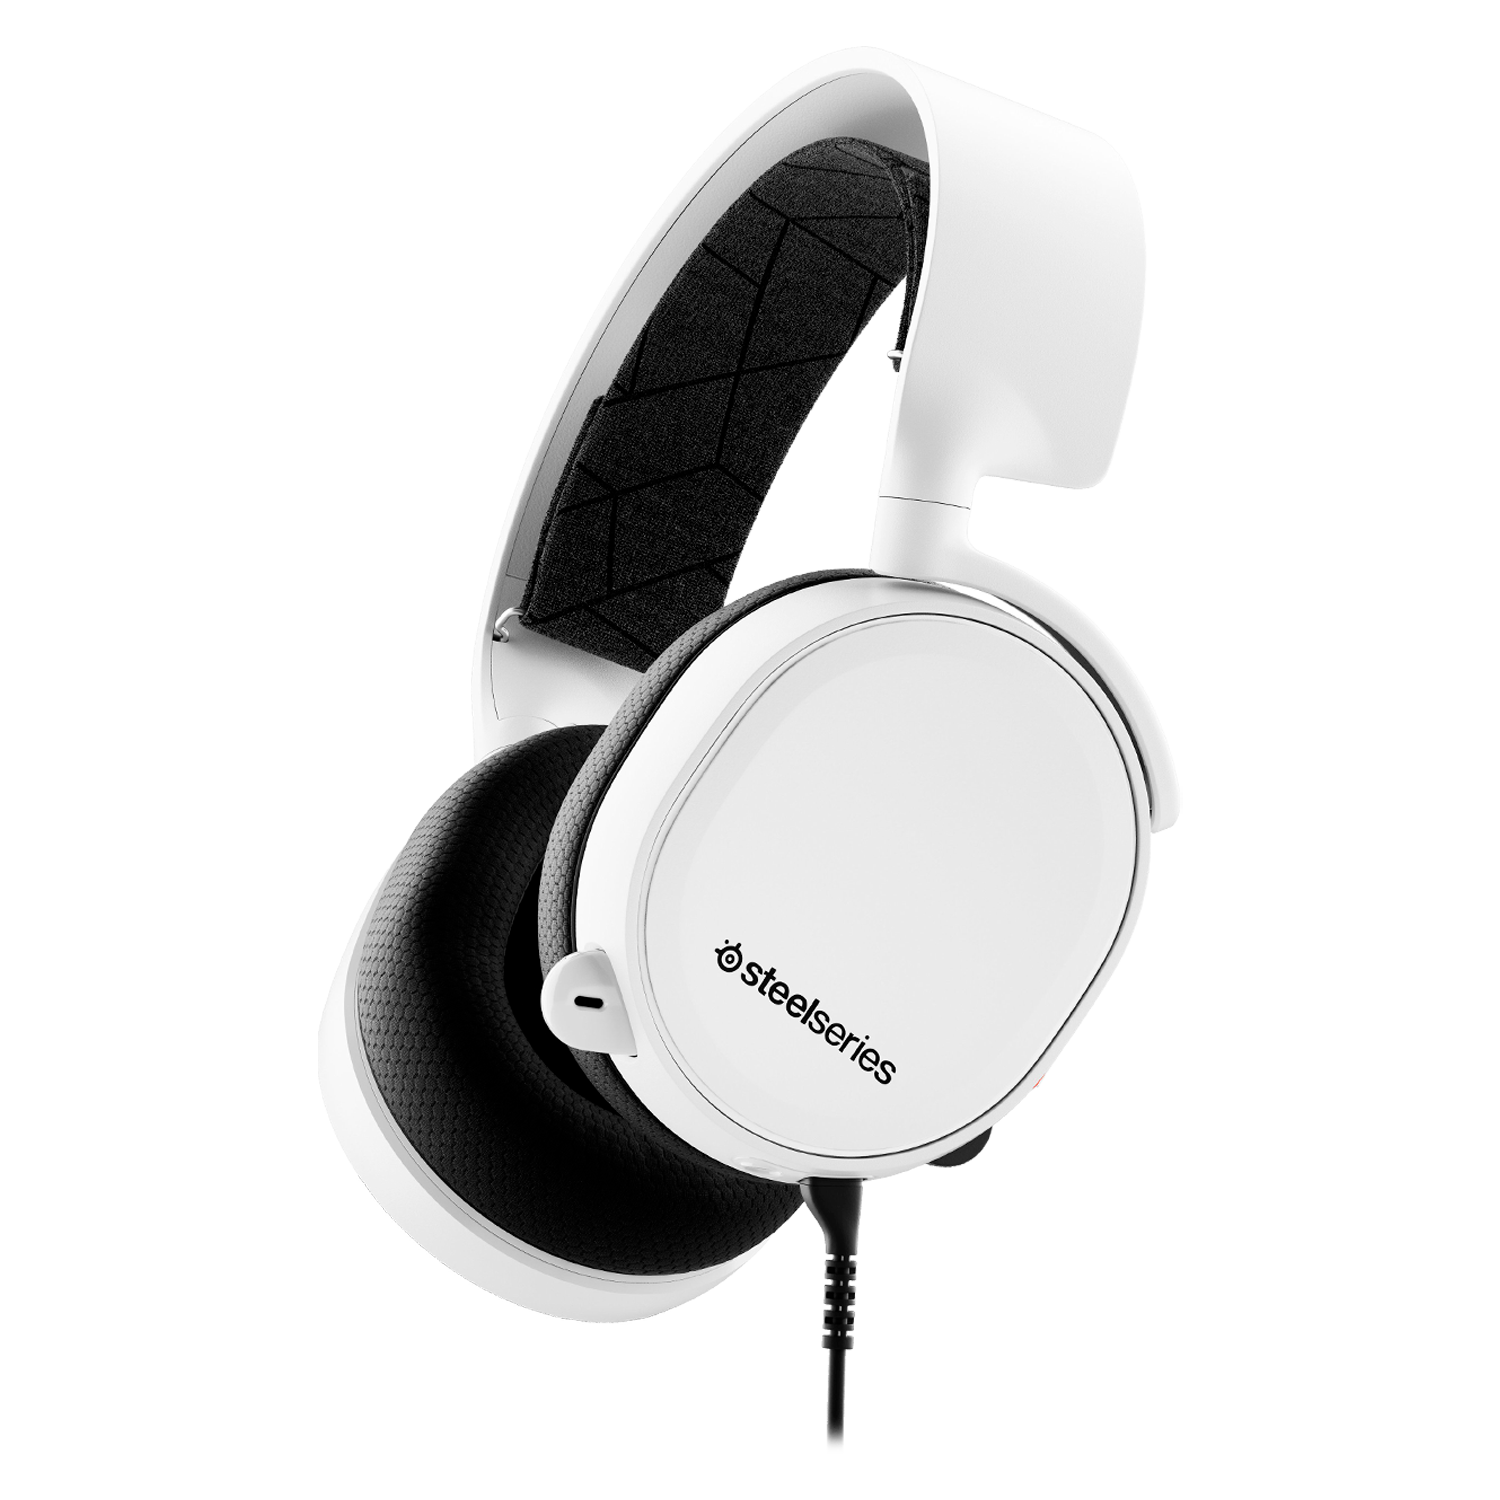 Fone Headset Steelseries Arctis 3 Console PS5            (61499) - Branco